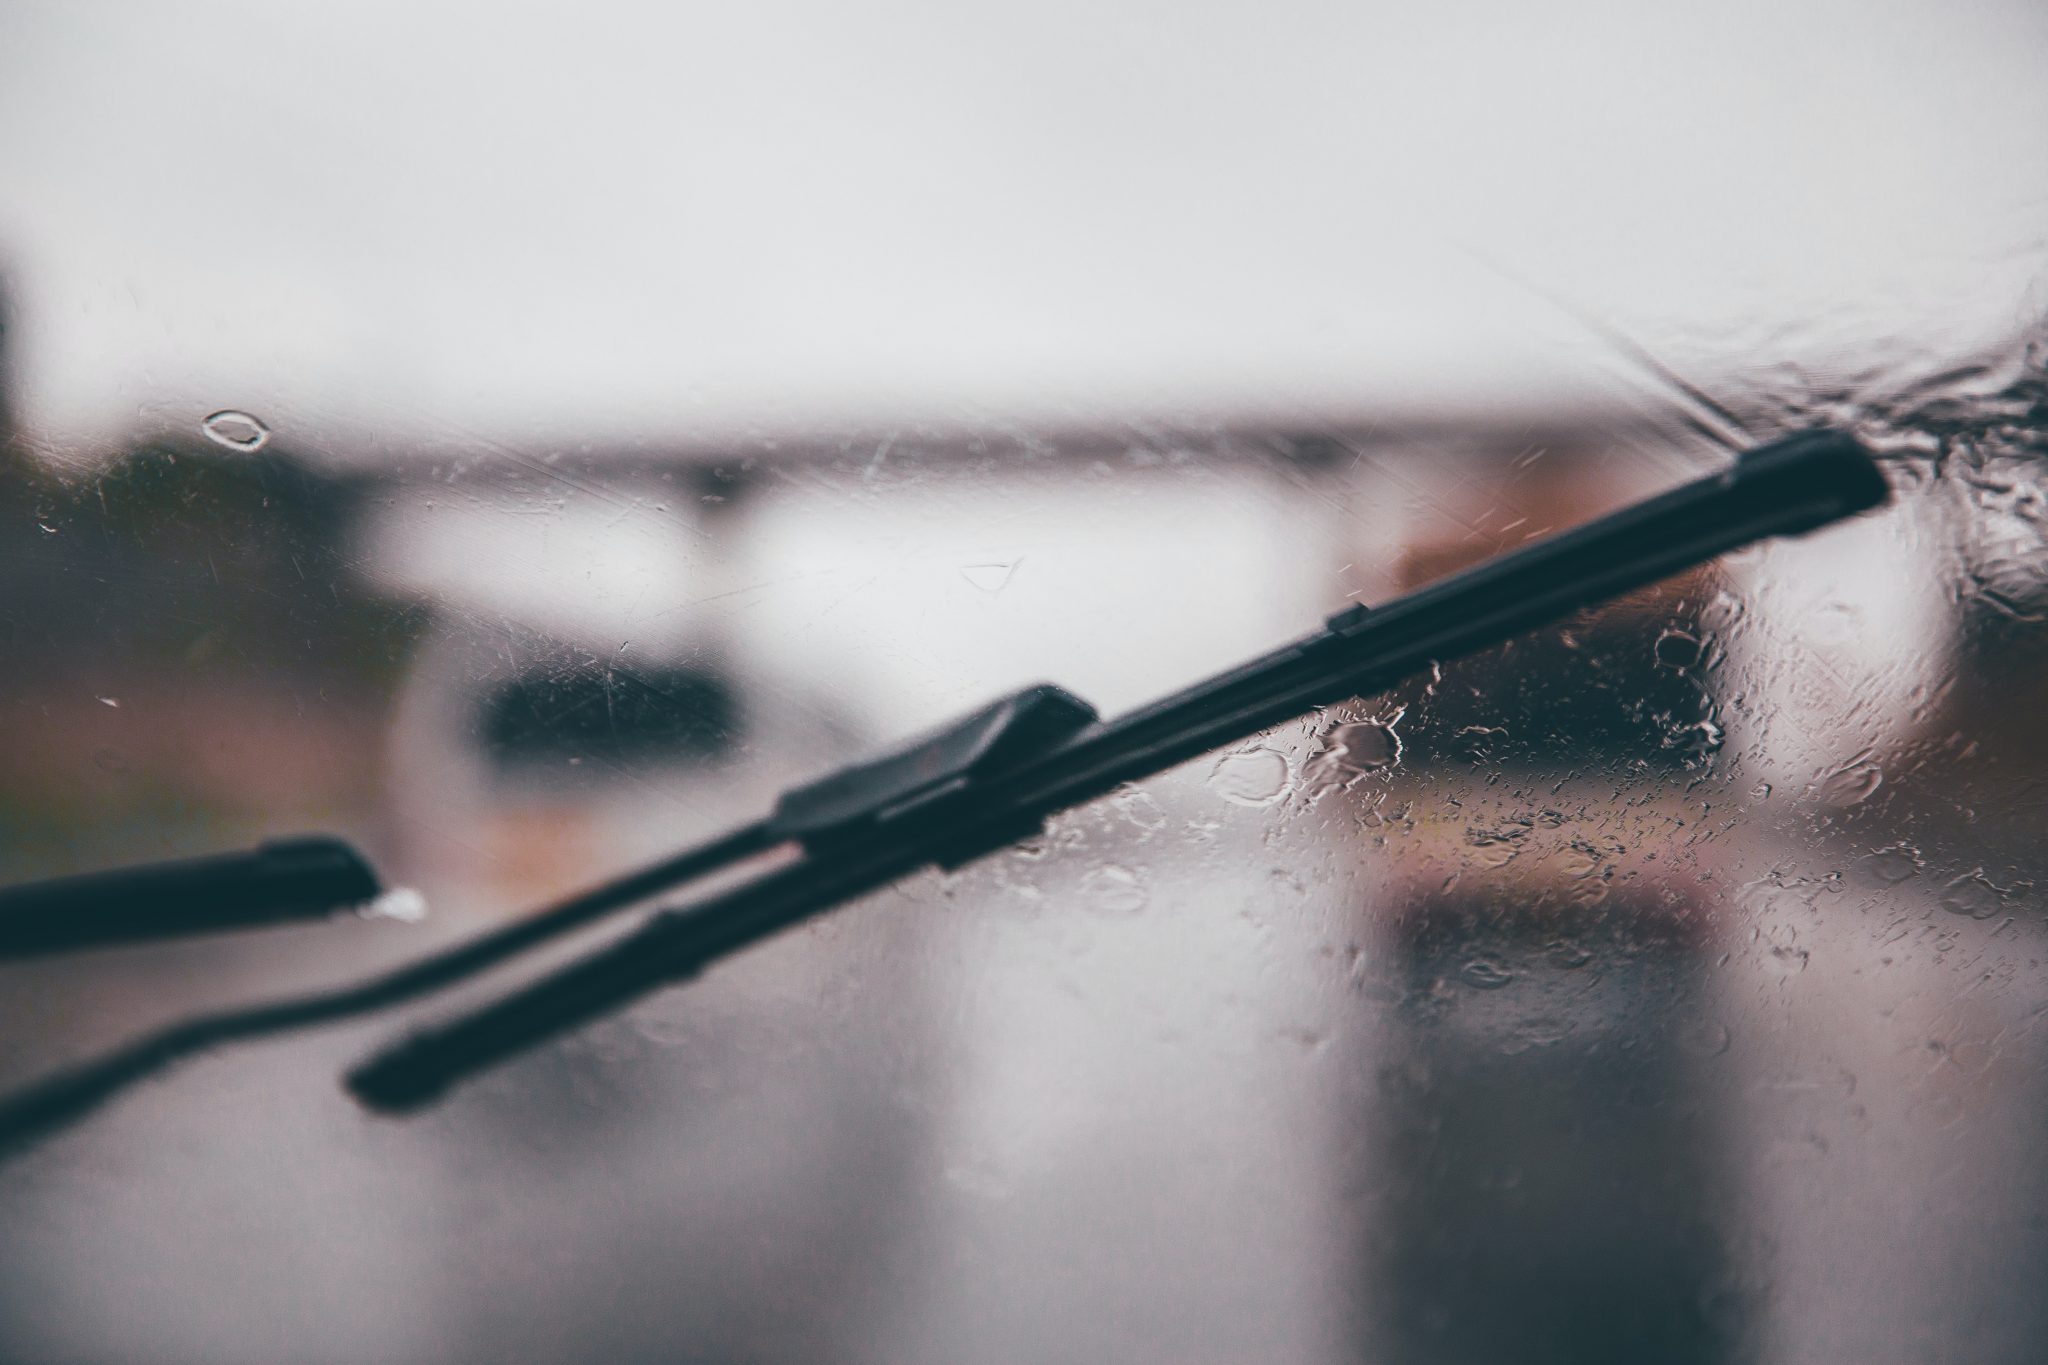 Wiper Blade shallow focus photography of black vehicle wiper